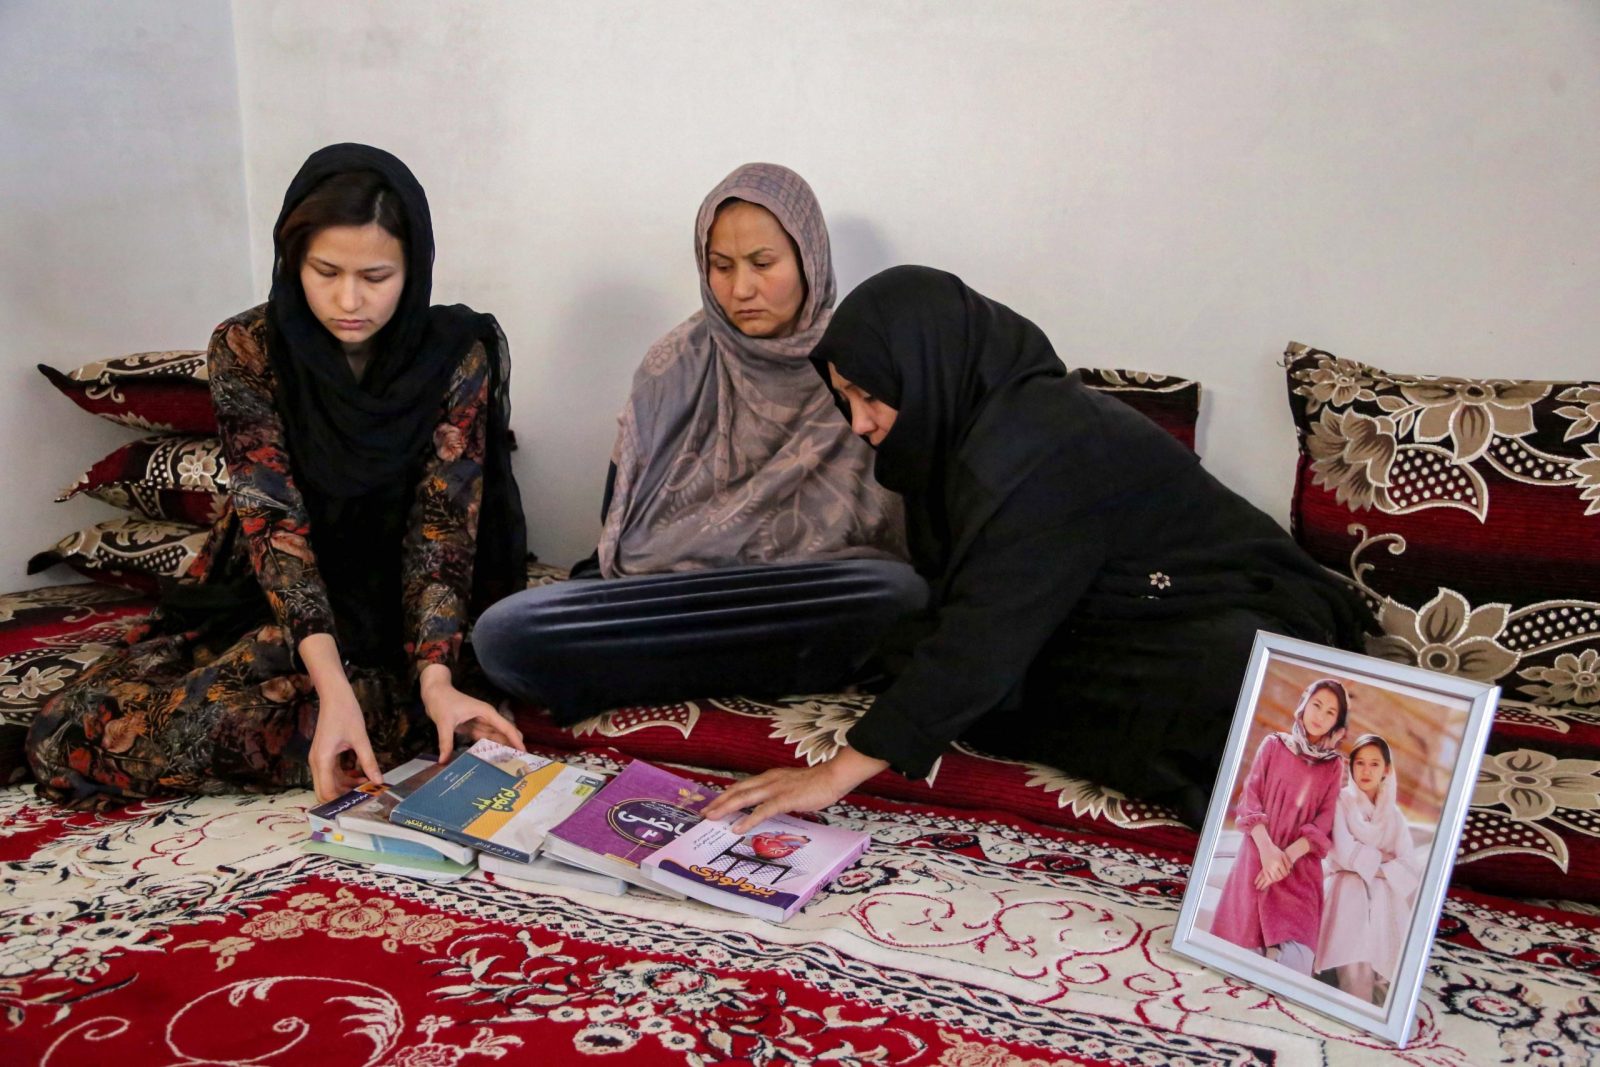 epa10539927 Mothers of deceased cousins Marzia, 18, and Hajar, 19, and Marzia's elder sister Zahra Mohammadi (L) arrange their books next to a picture of them at their home in Kabul, Afghanistan, 22 March 2023 (issued 24 March 2023). The two cousins were killed among tens of other students, mostly female, who had gathered for a practice university entrance exam at an institute of Kabul in September 2022, following a suicide bomb attack. In tribute to the girls, their families placed a library with their favorite books on their grave at a graveyard in Dasht-e-barchi area.  EPA/SAMIULLAH POPAL